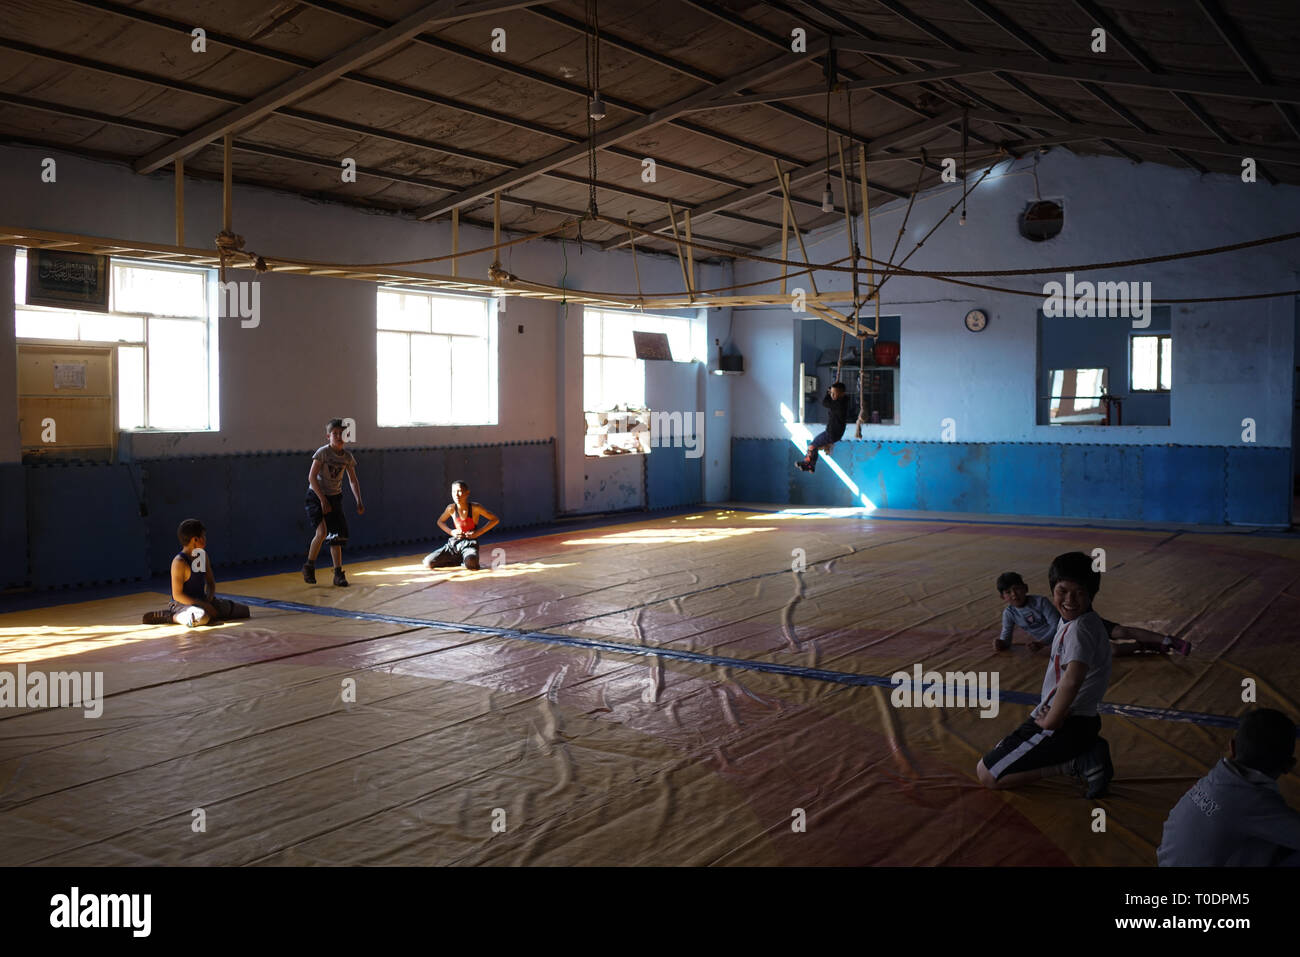 The Maiwand Wrestling Club High Resolution Stock Photography and Images